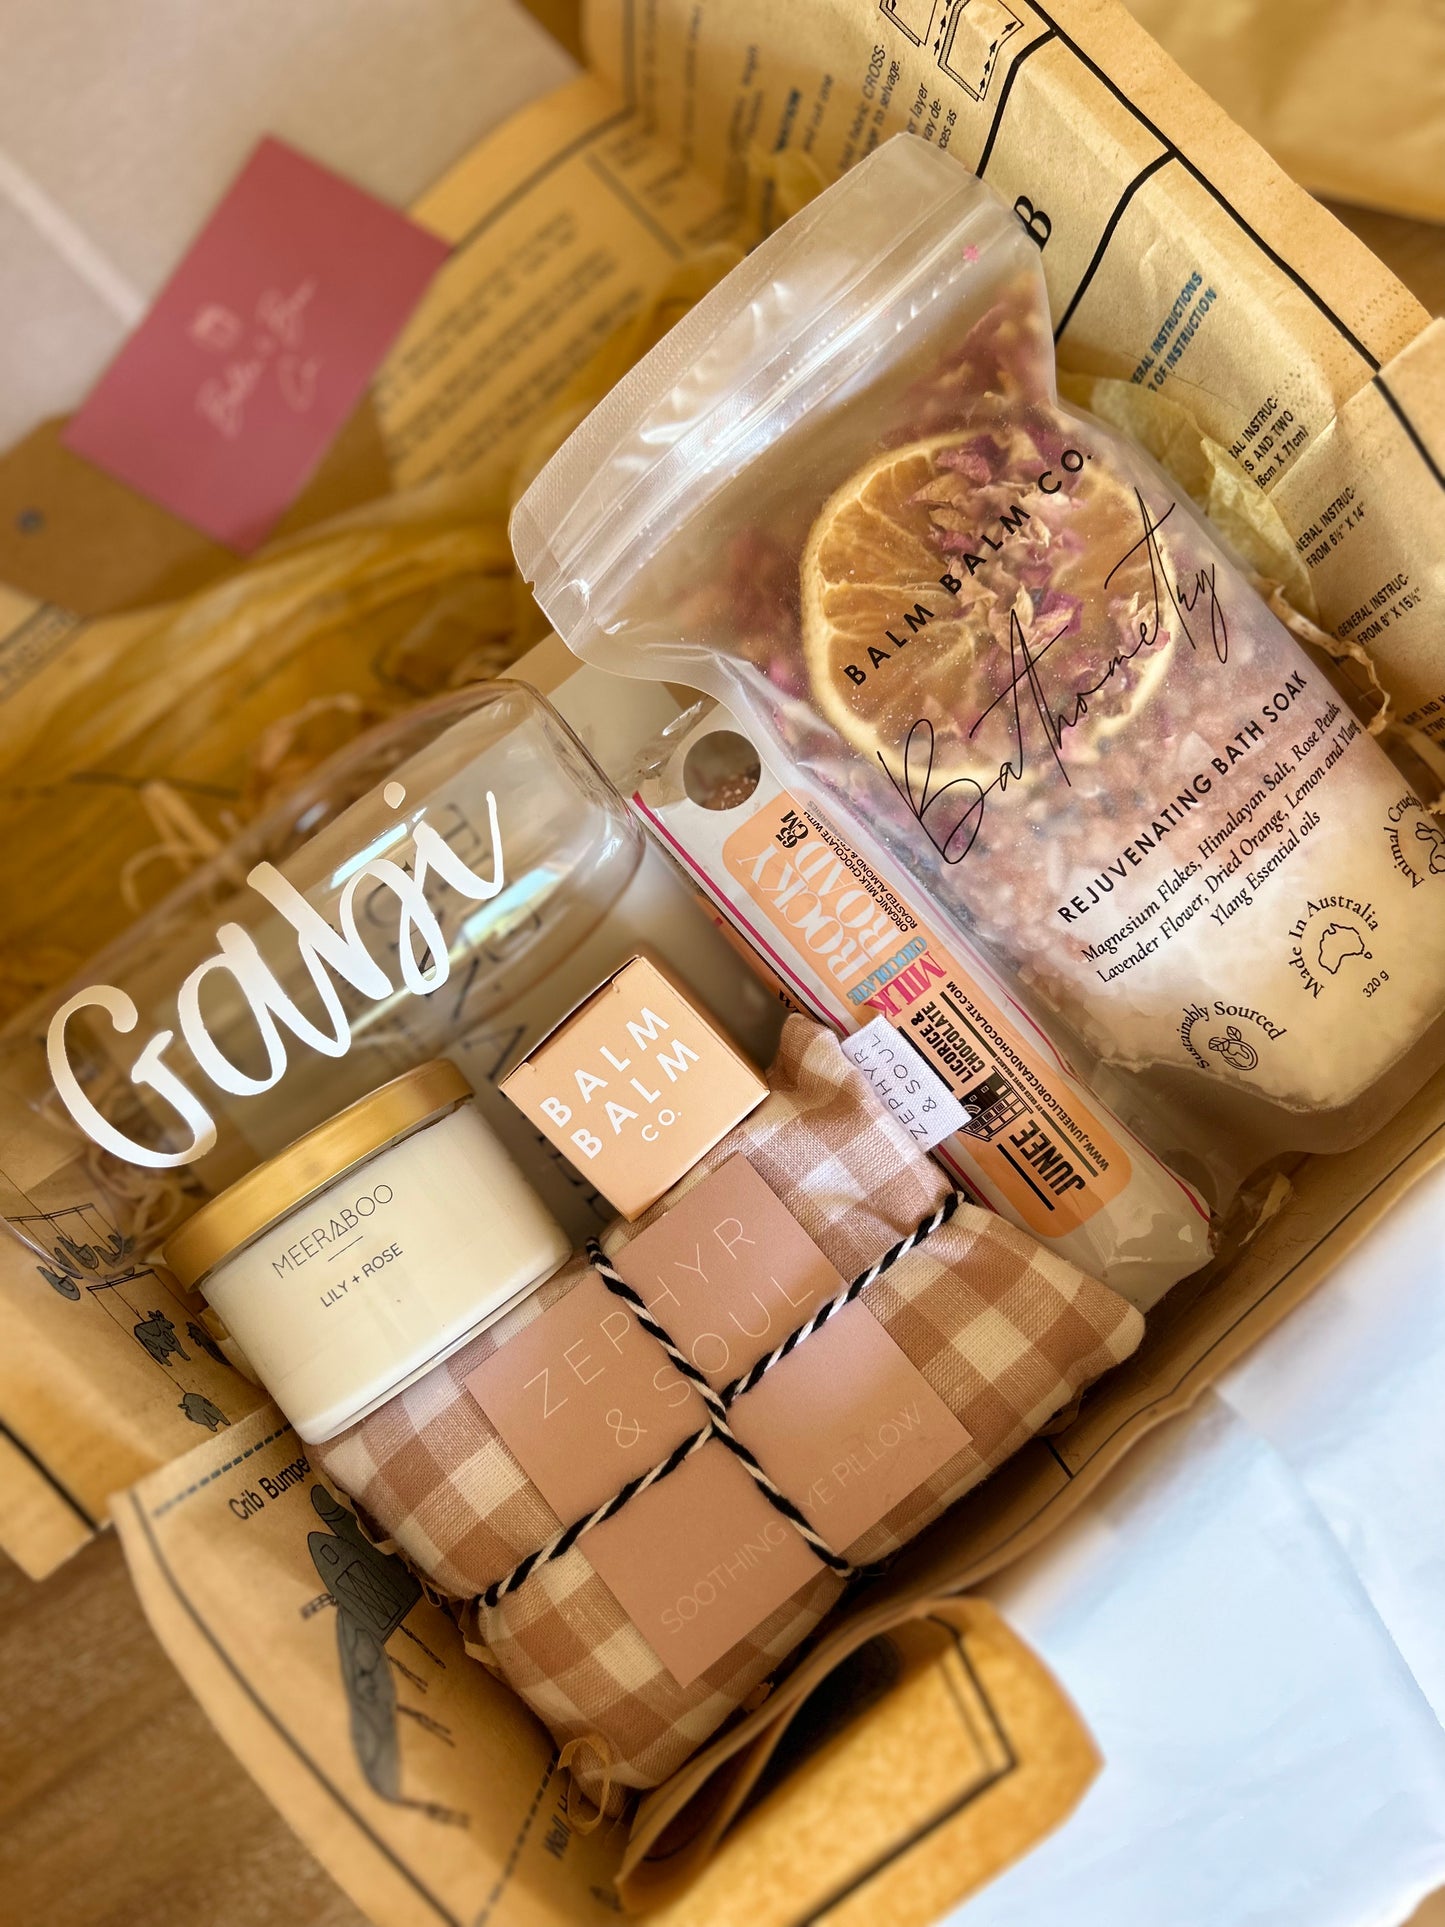 Make your 'Will You Be My Bridesmaid?' moment extraordinary with our curated gift boxes. Handcrafted with love, delivered locally to Cootamundra and Temora or shipped Australia-wide. Personalize your ask in the most memorable way!